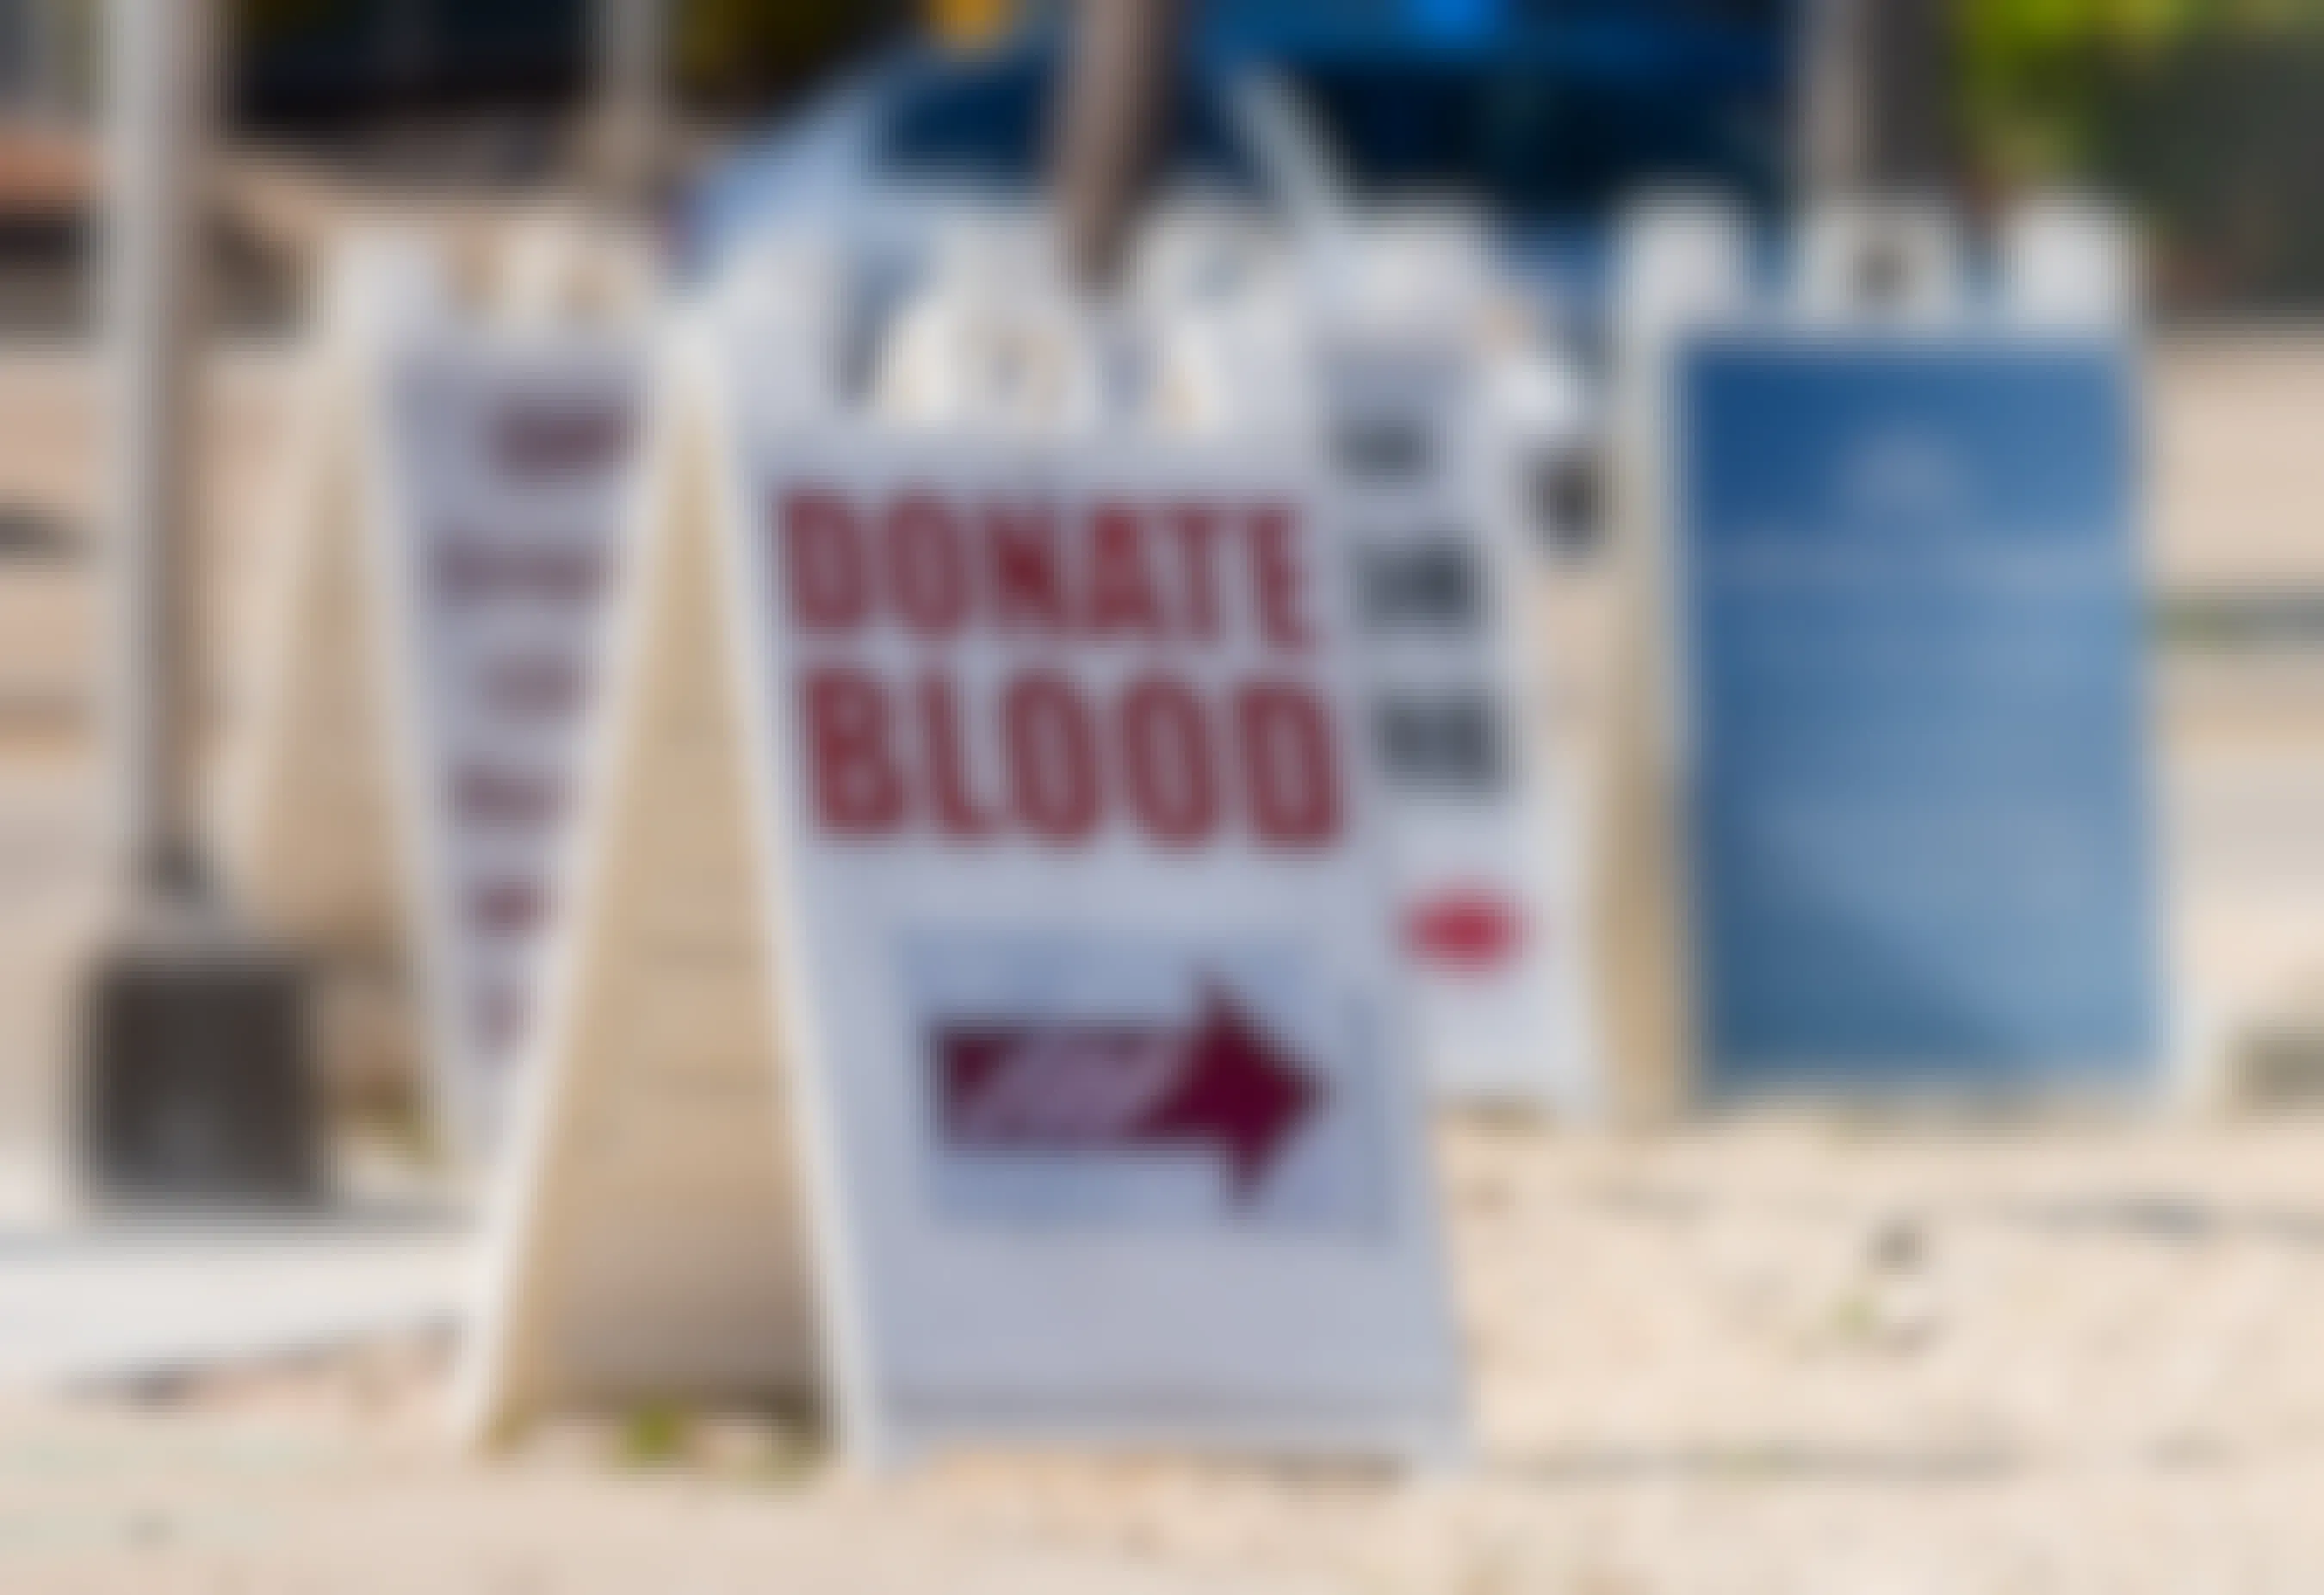 Sign pointing to a blood drive